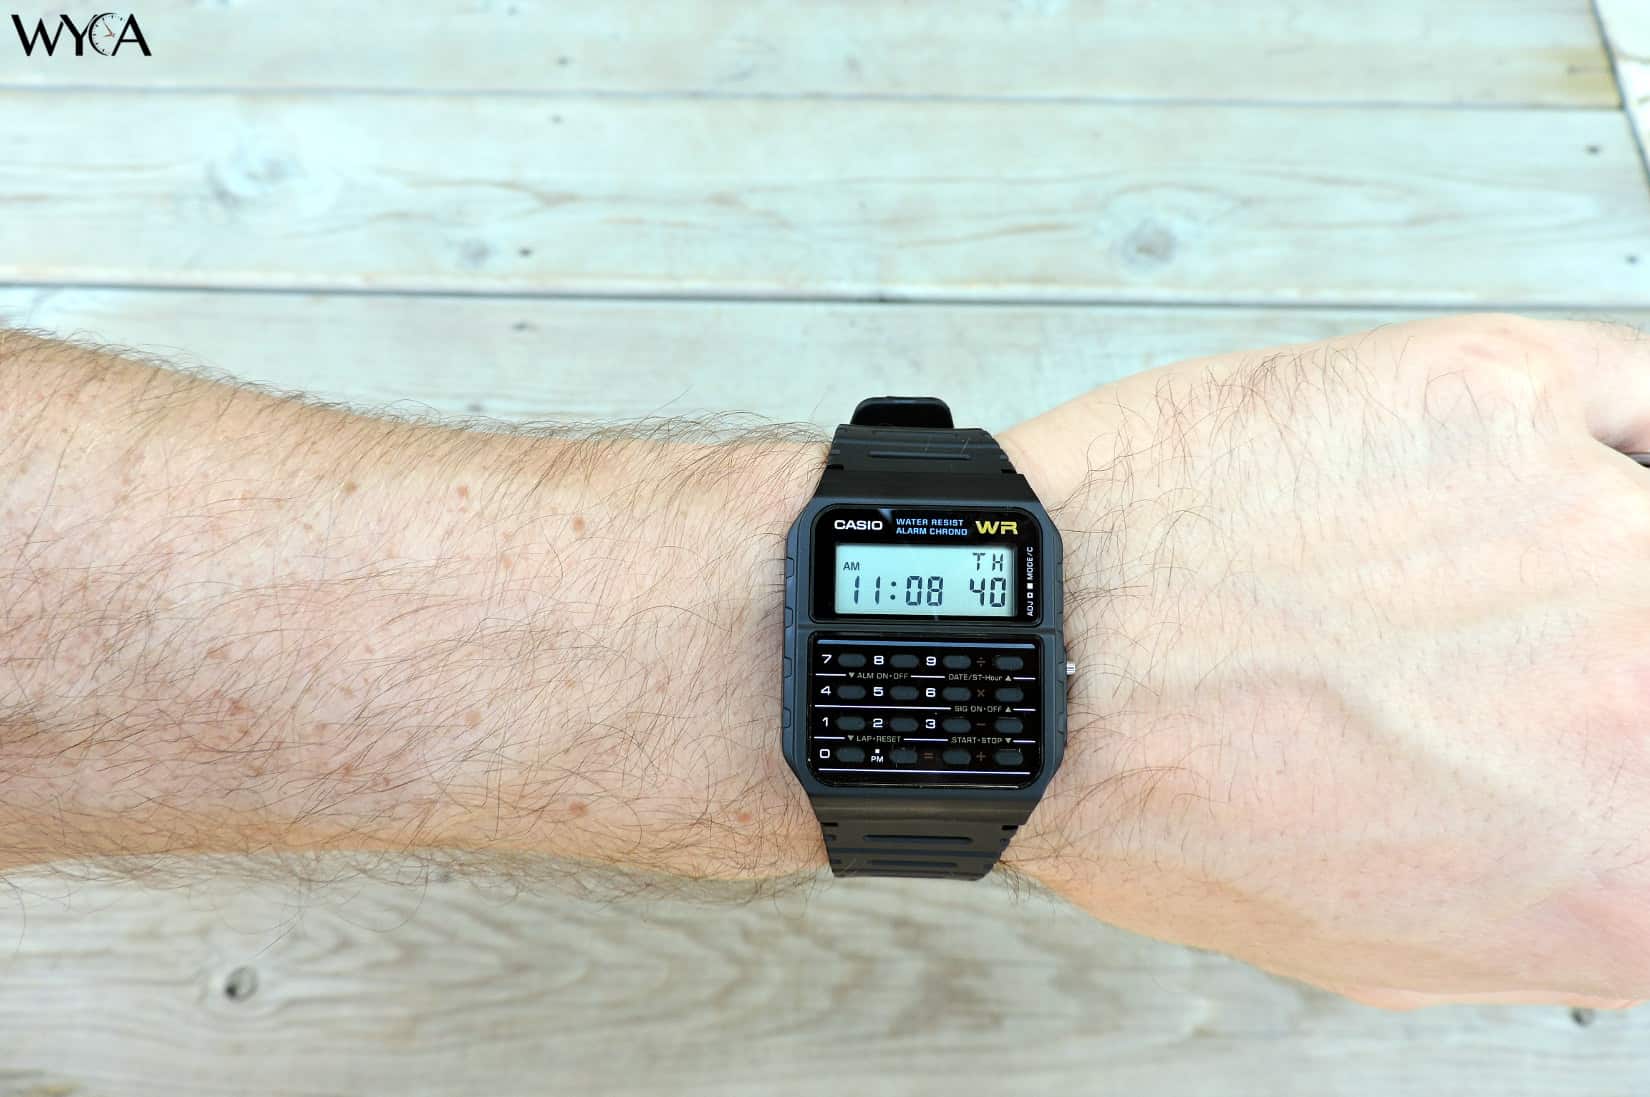 A Throwback to My First Watch: The CA-53W Databank Watch